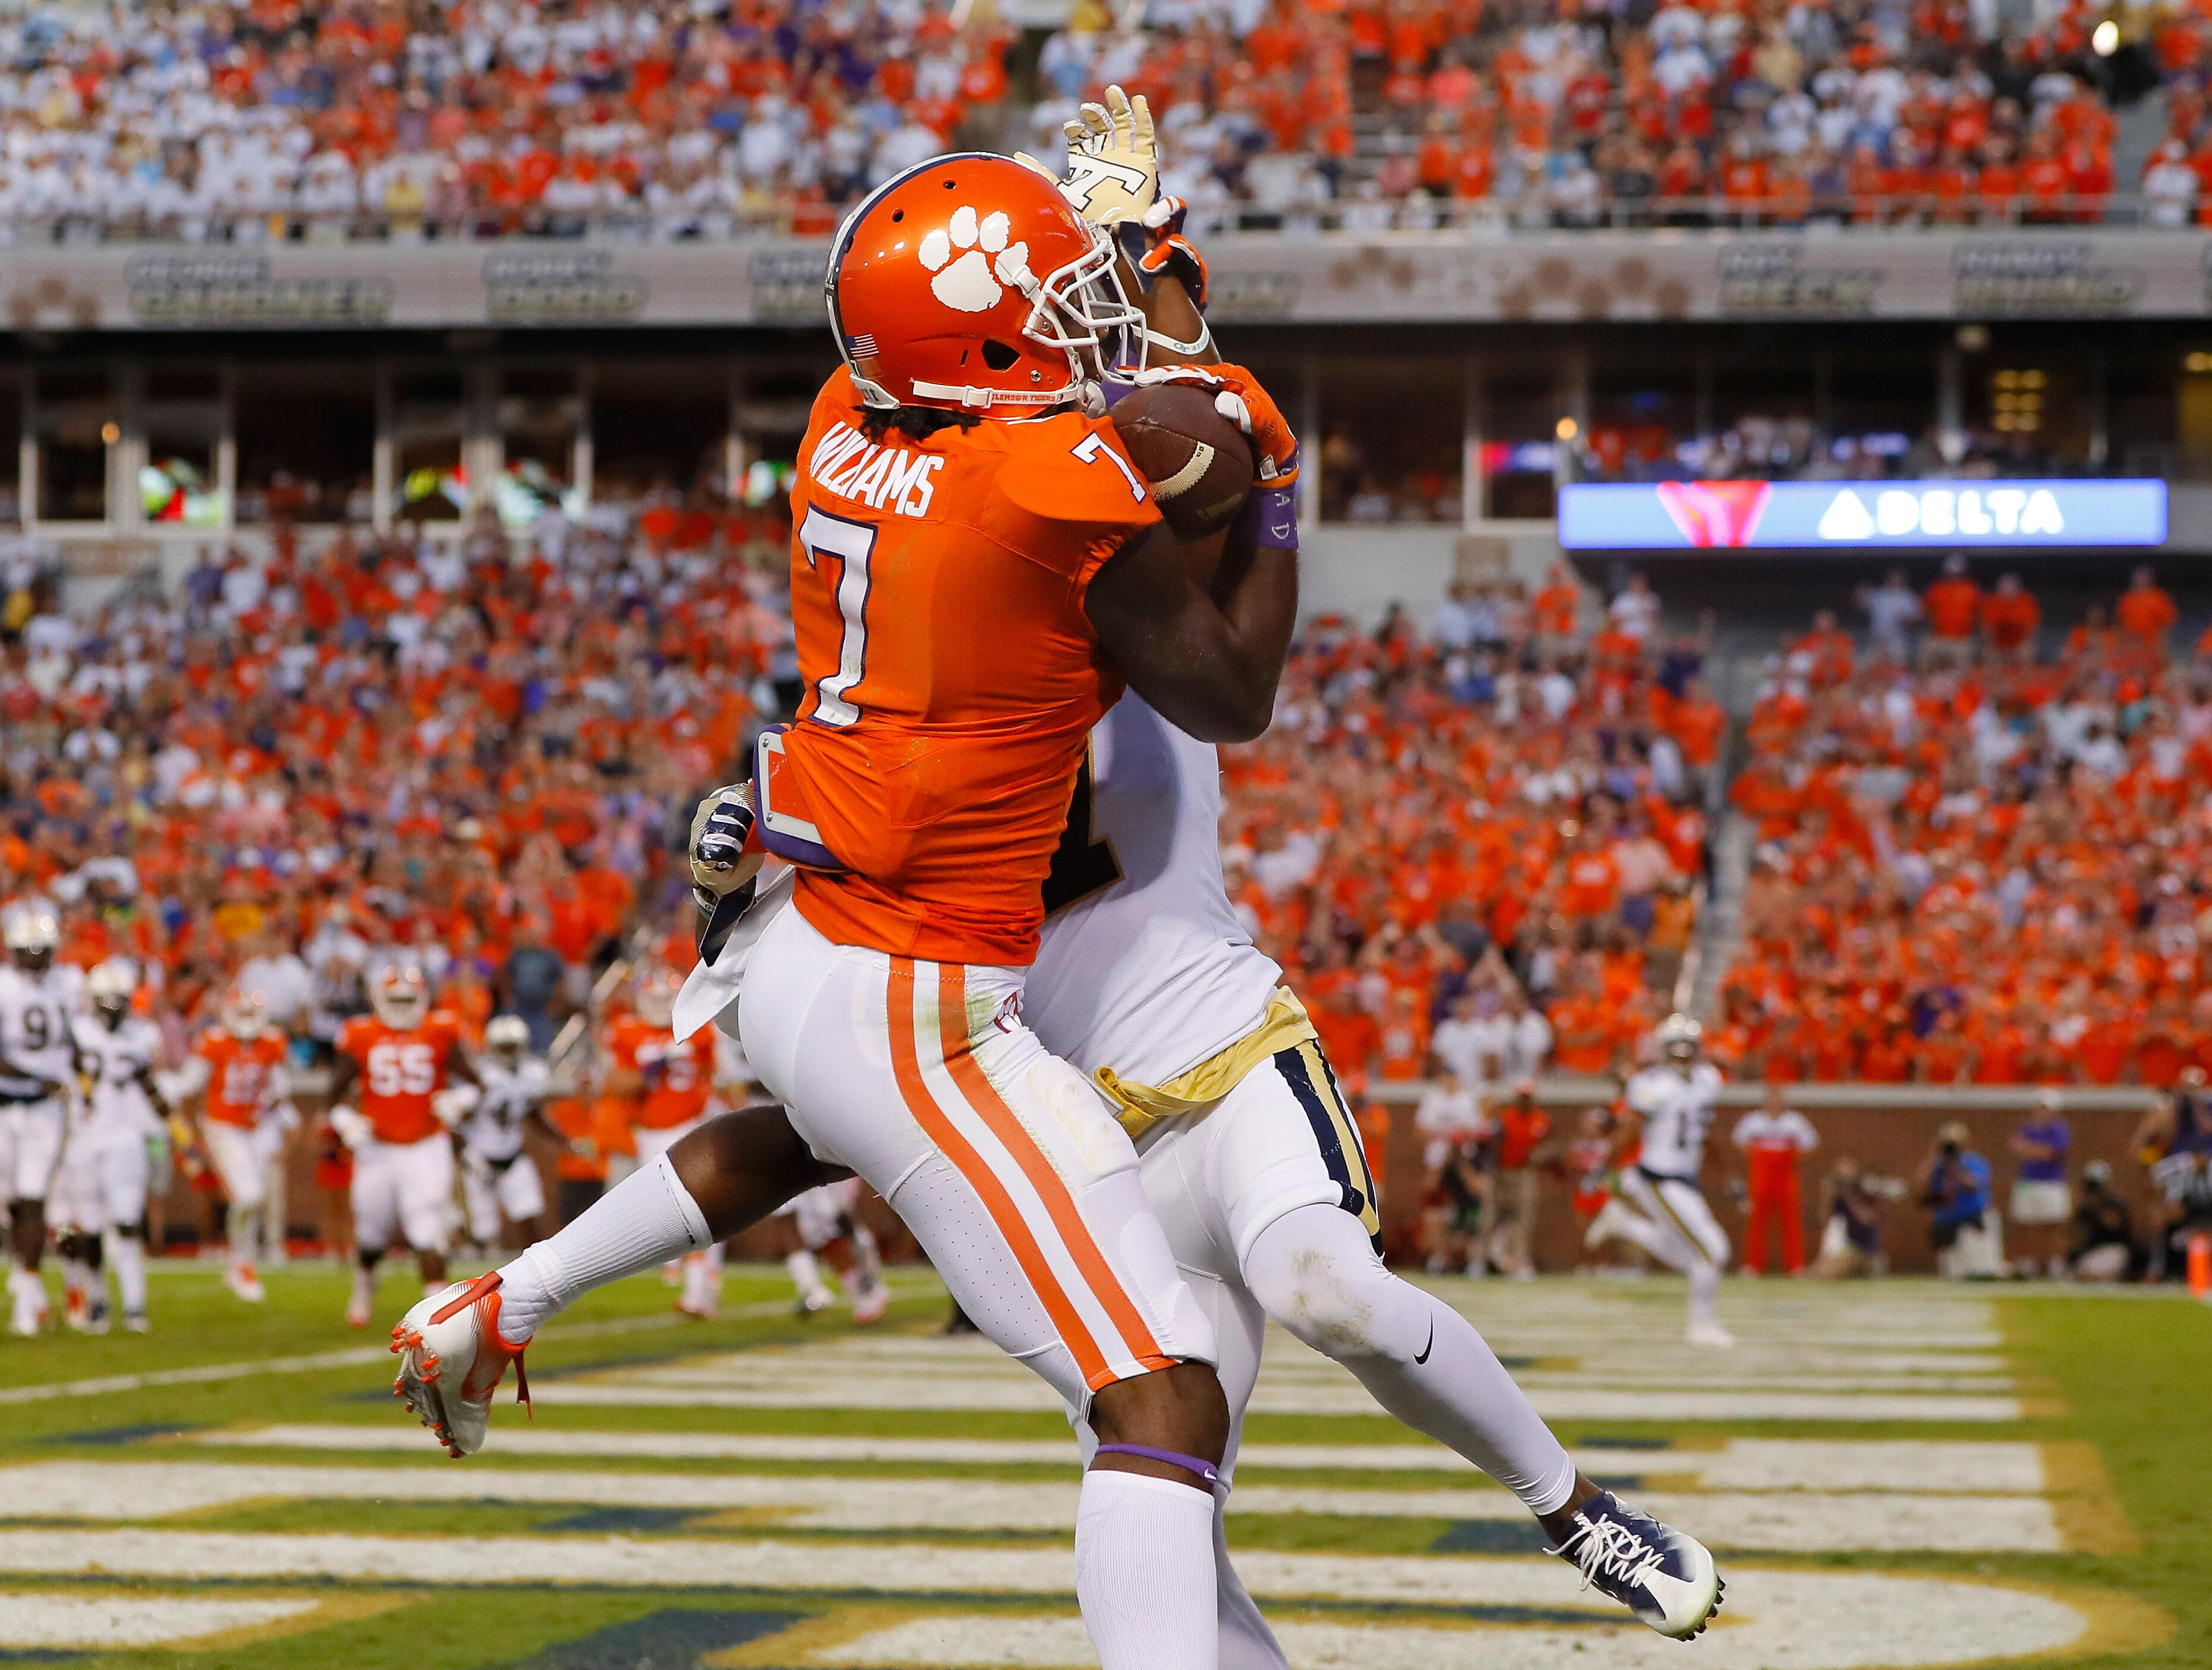 ATLANTA, GA - SEPTEMBER 22:  Mike Williams #7 of the Clemson Tigers pulls in this touchdown reception against Lance Austin #17 of the Georgia Tech Yellow Jackets at Bobby Dodd Stadium on September 22, 2016 in Atlanta, Georgia.  (Photo by Kevin C. Cox/Gett